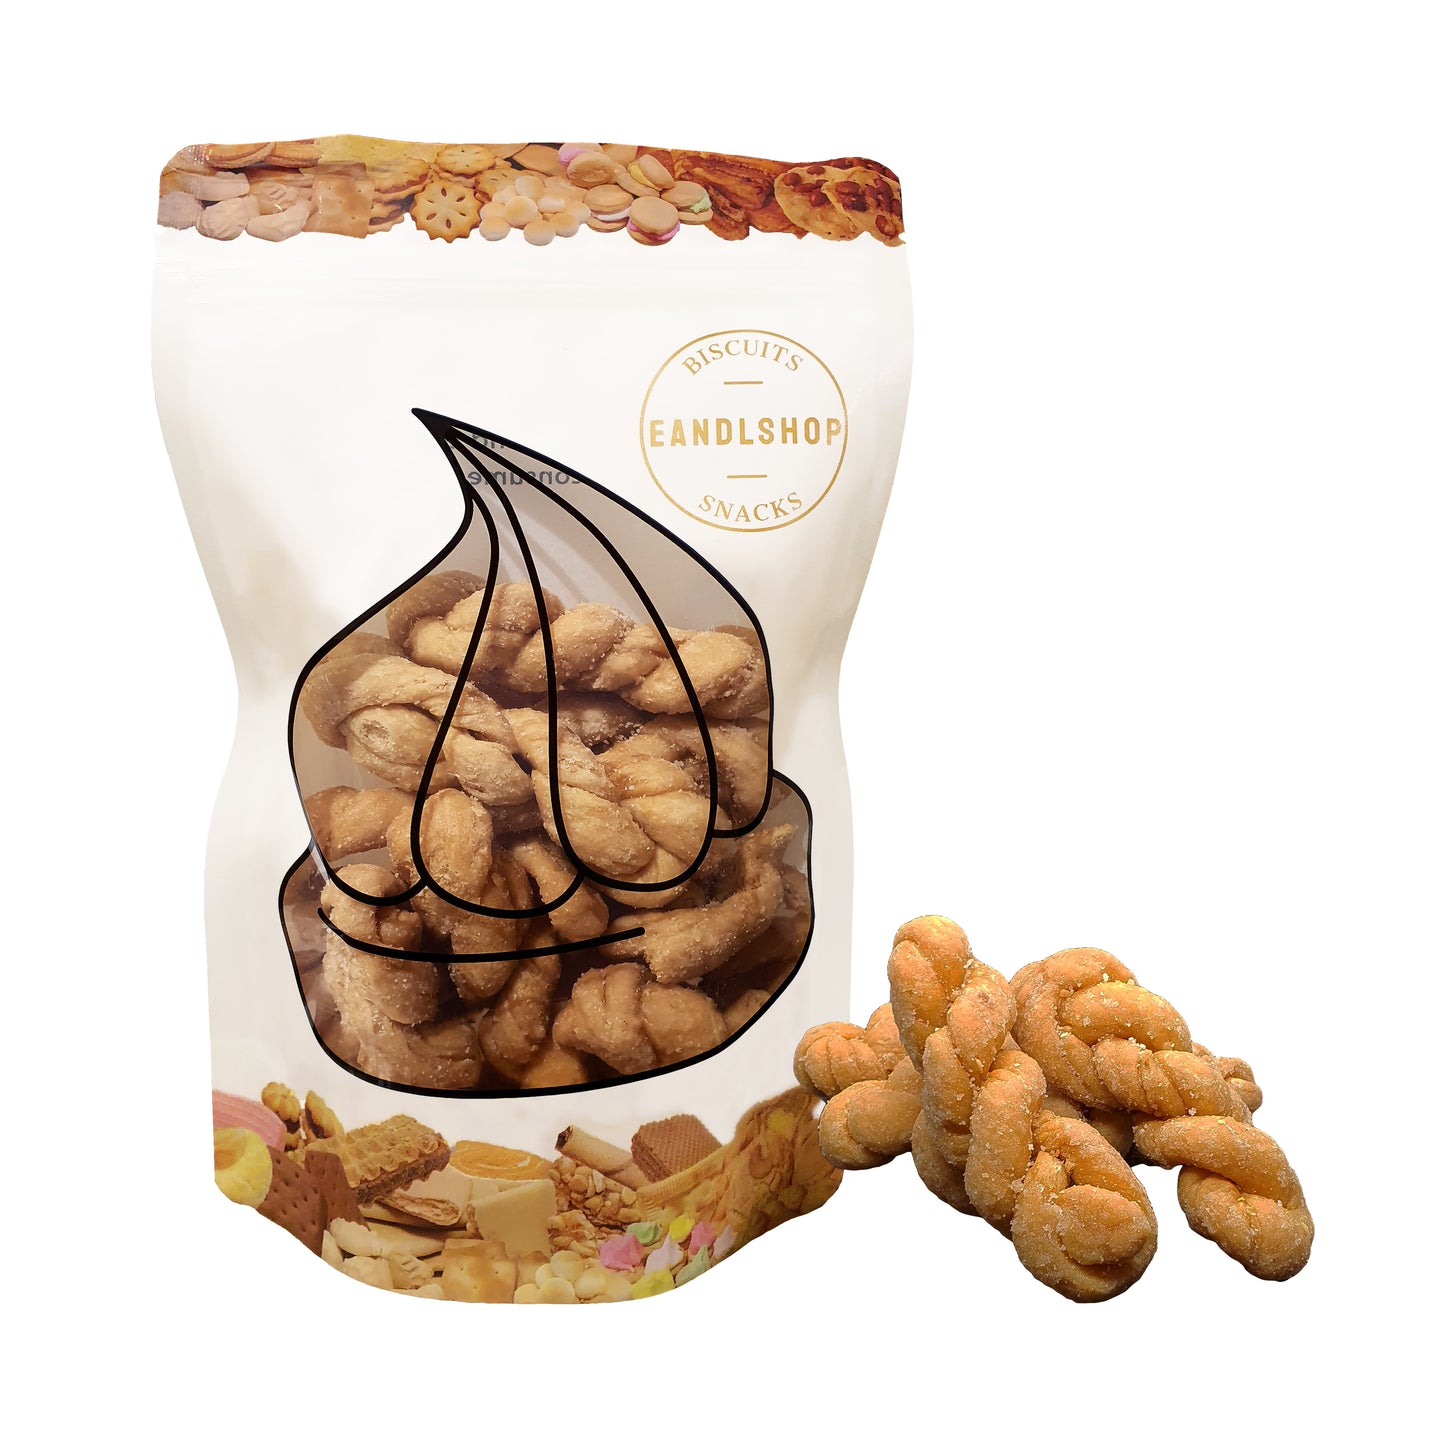 String Cracker. Old-school biscuits, modern snacks (chips, crackers), cakes, gummies, plums, dried fruits, nuts, herbal tea – available at www.EANDLSHOP.com